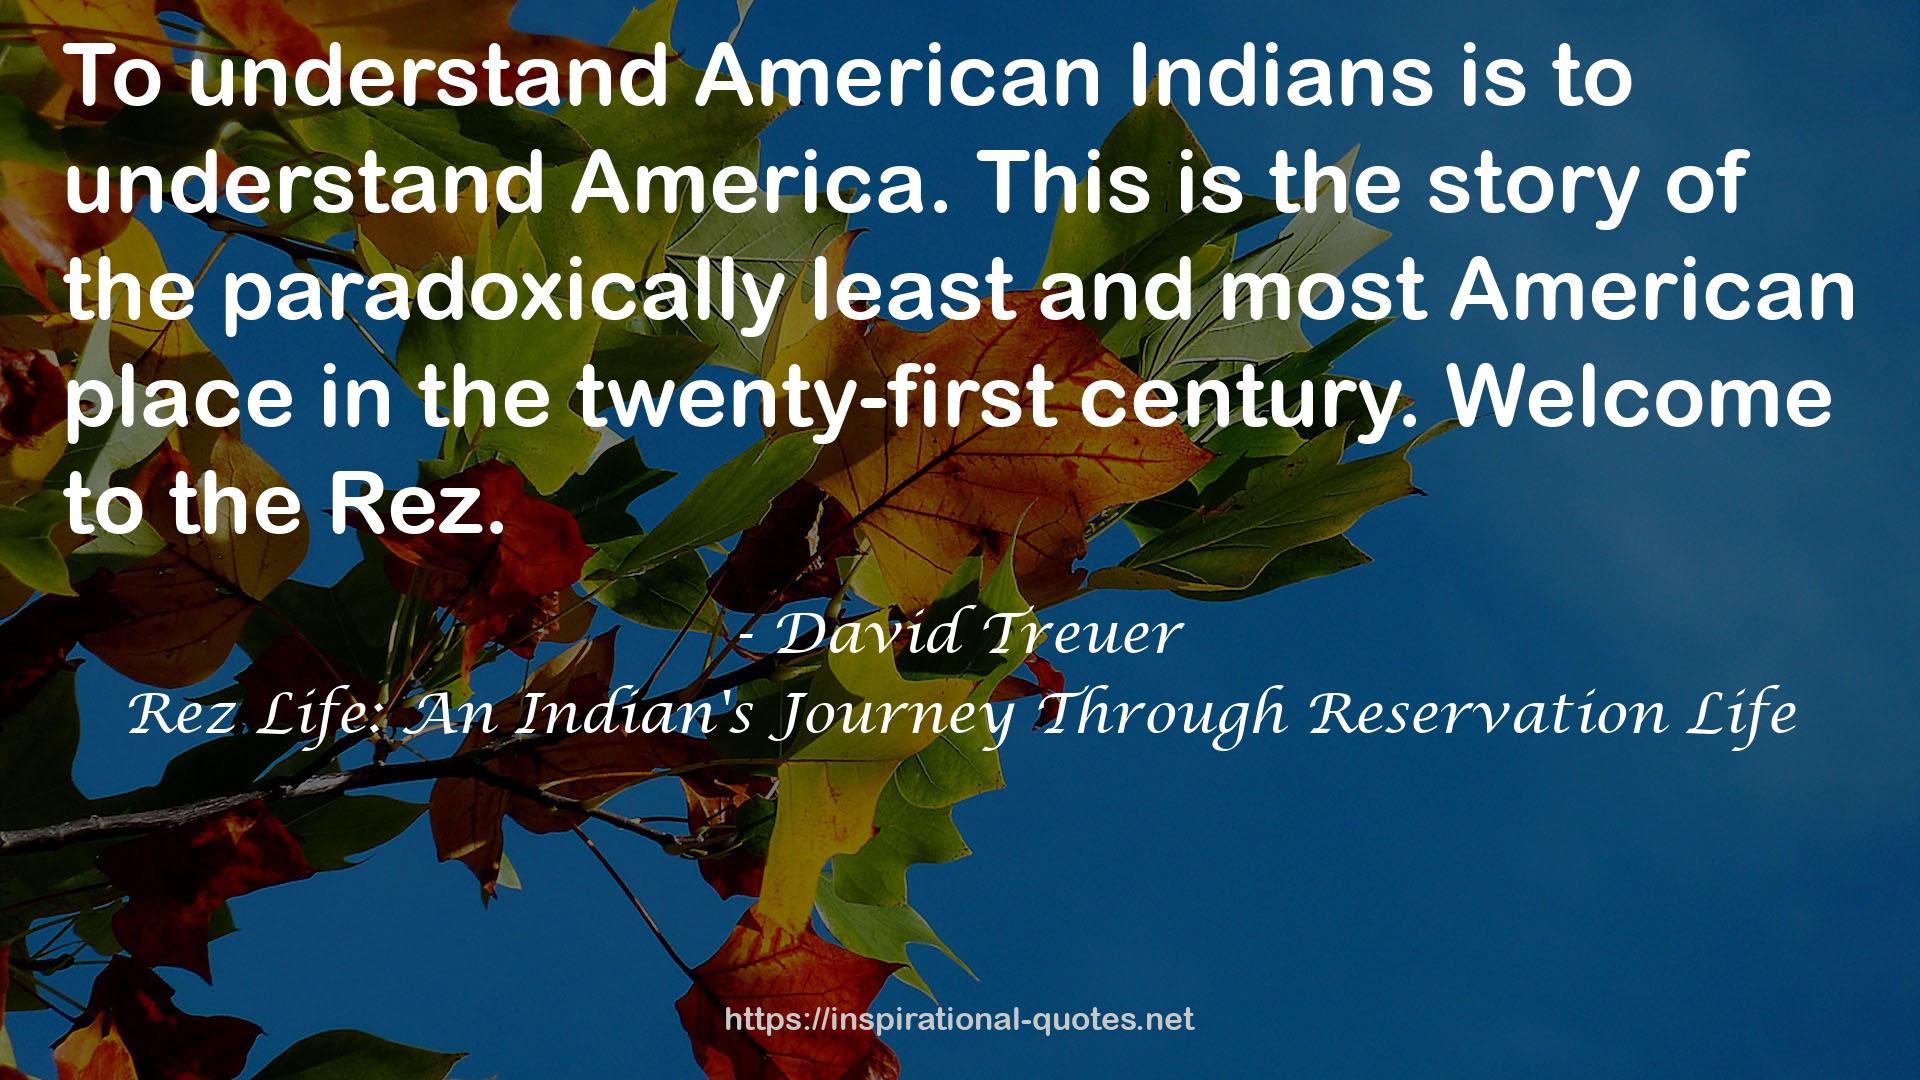 Rez Life: An Indian's Journey Through Reservation Life QUOTES